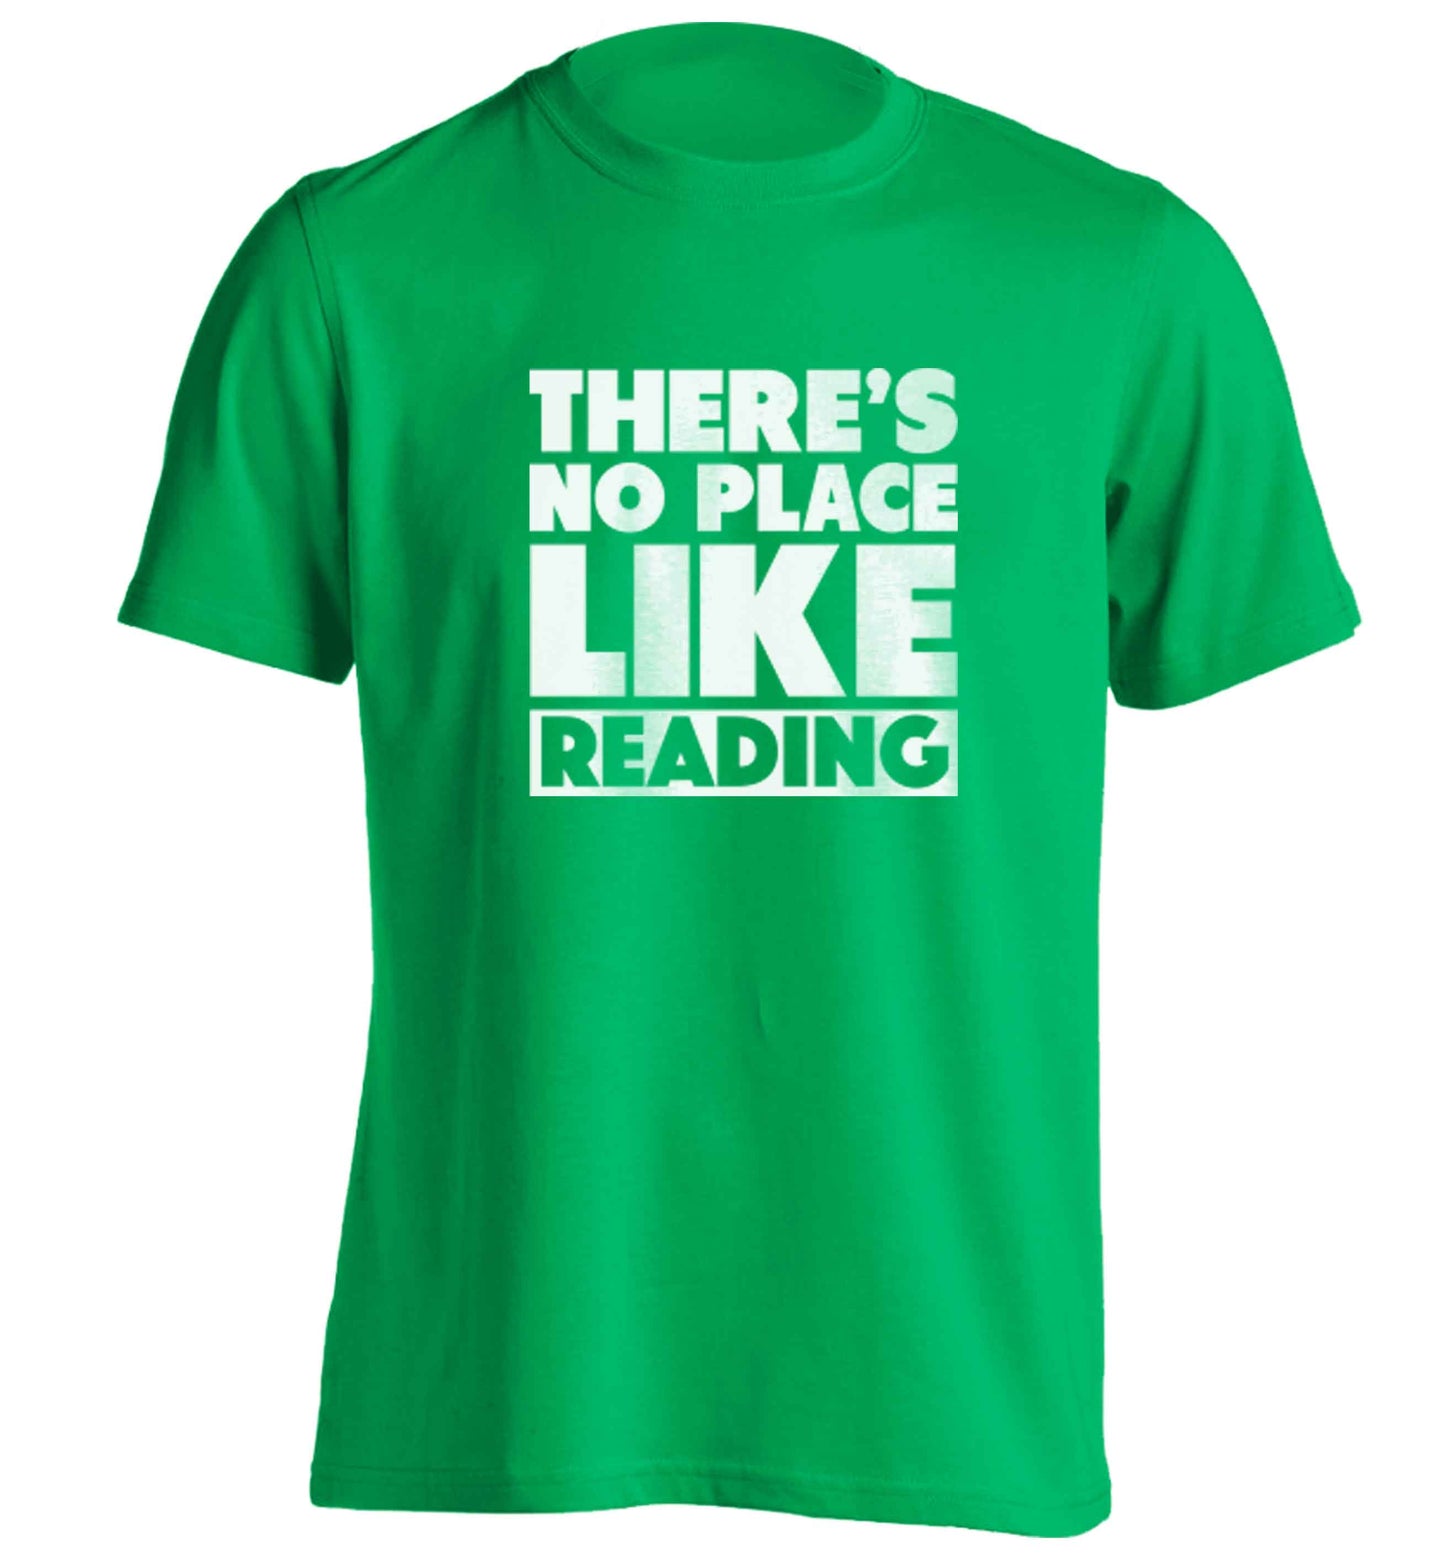 There's no place like Readingadults unisex green Tshirt 2XL